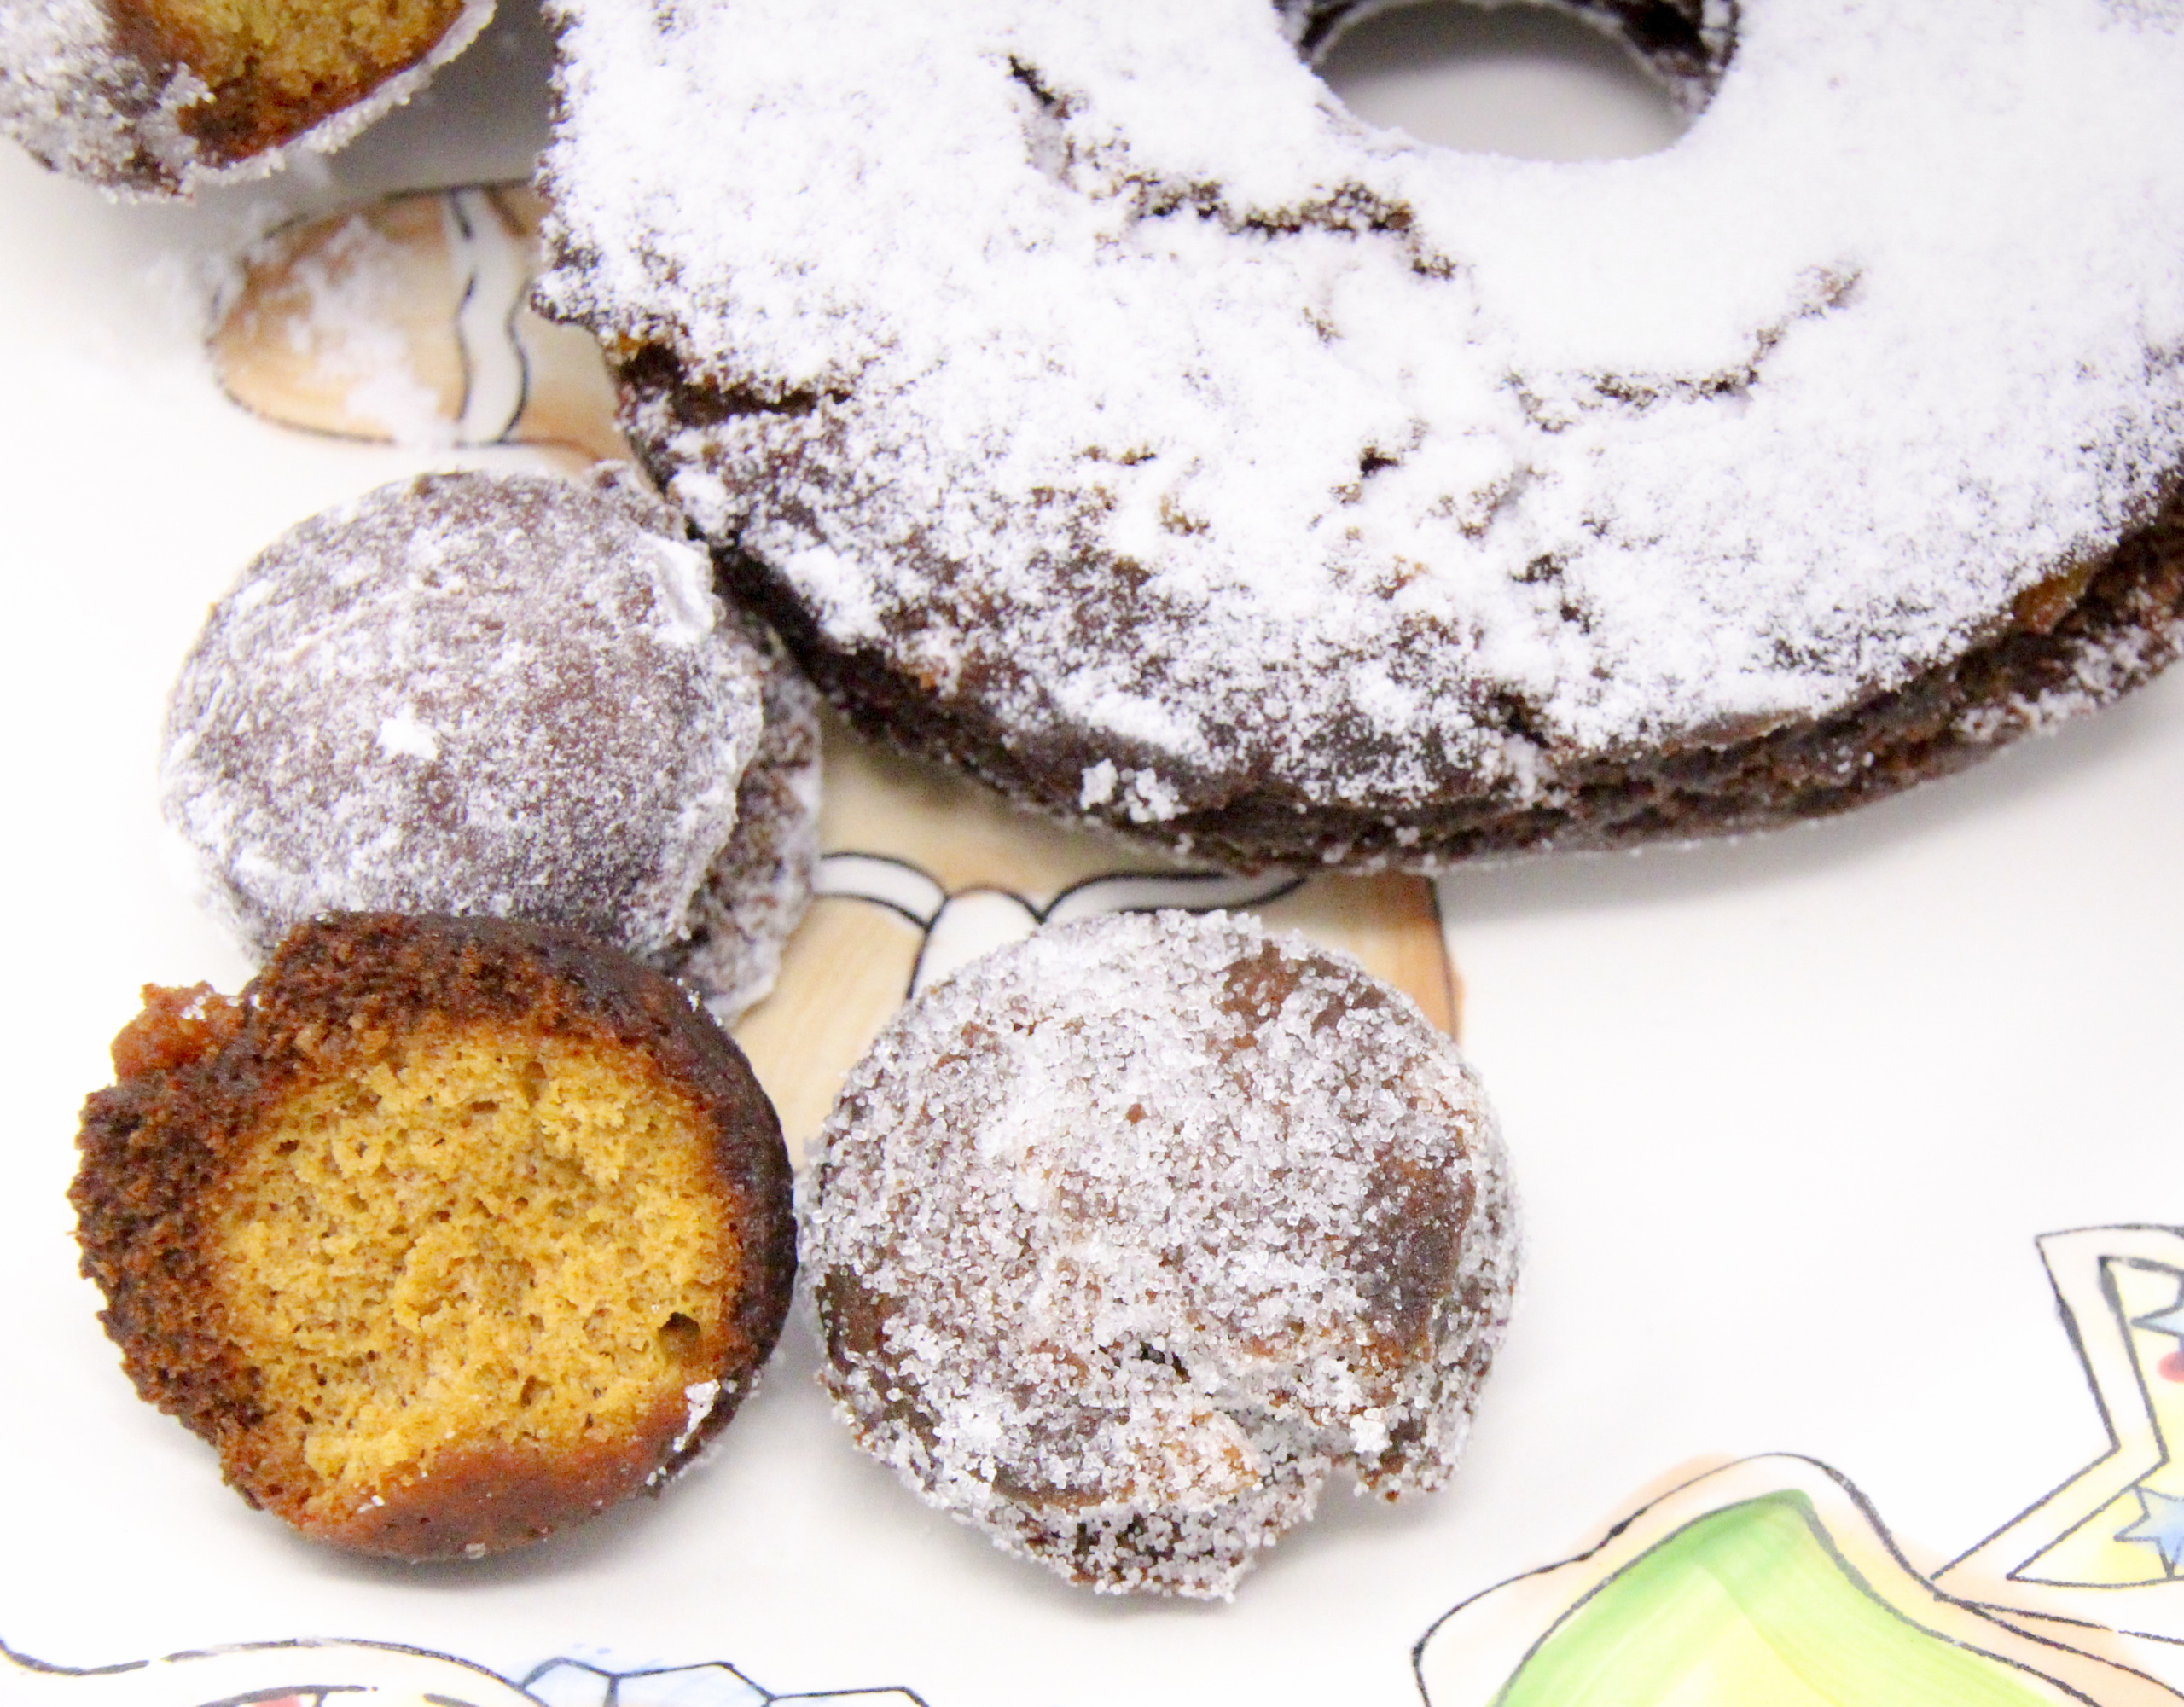 With the usual spices – ginger, cinnamon, nutmeg, and cloves – providing the gingerbread flavor, it's the addition of candied ginger that make these donuts Gingerbread Donuts outstanding. Recipe shared with permission granted by Ginger Bolton, author of DECK THE DONUTS. 